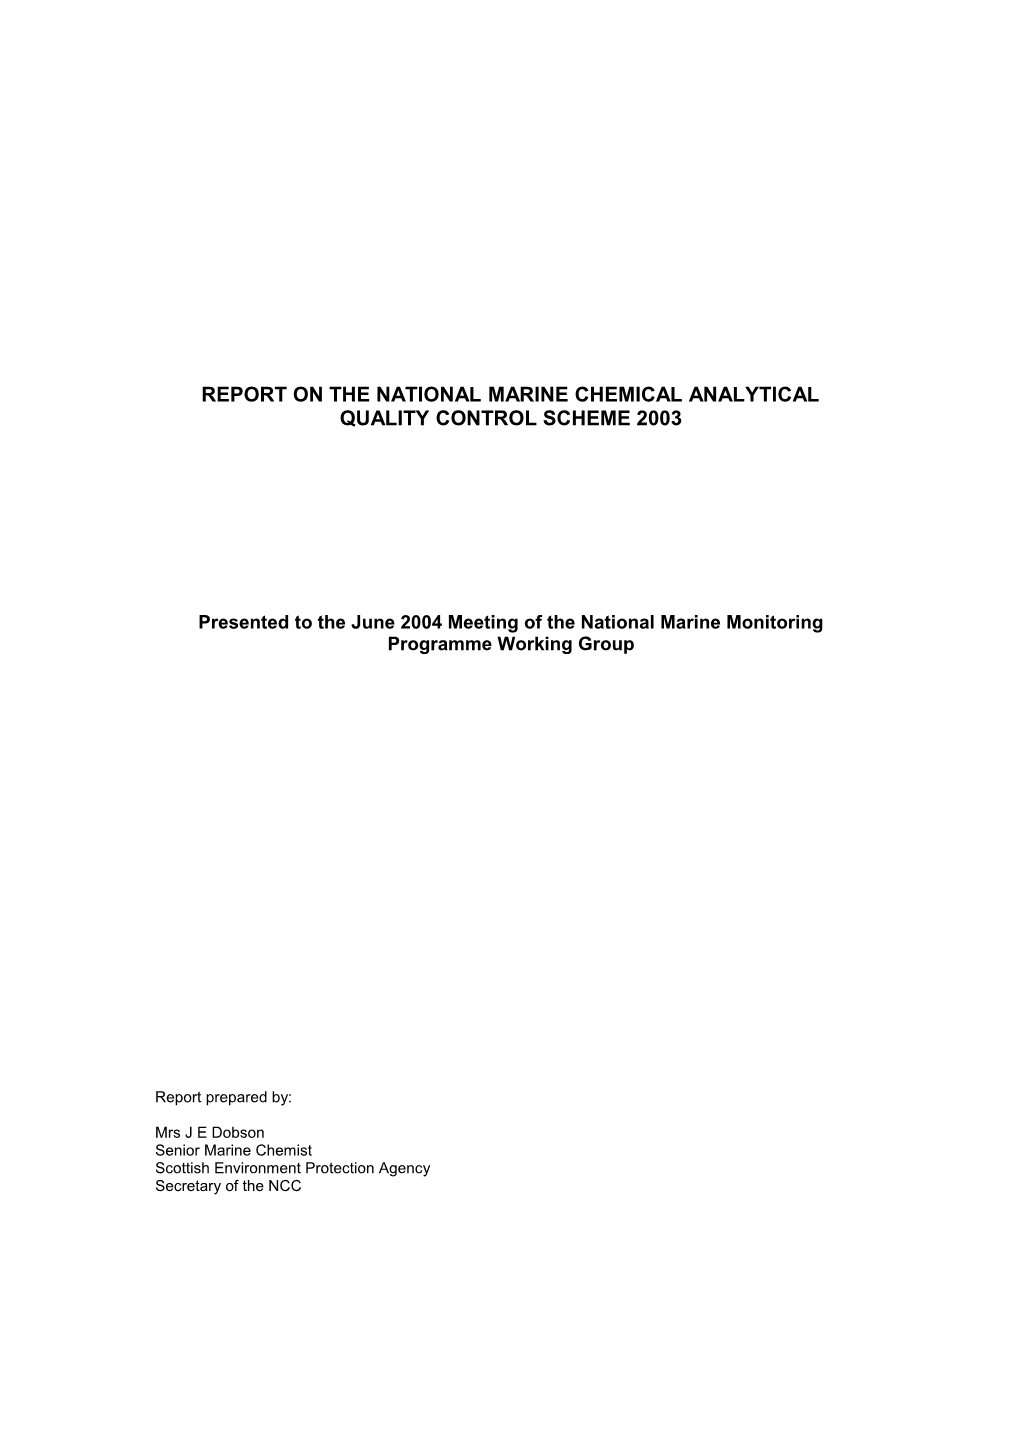 Presented to the June 20 0043 Meeting of the National Marine Monitoring Programme Working